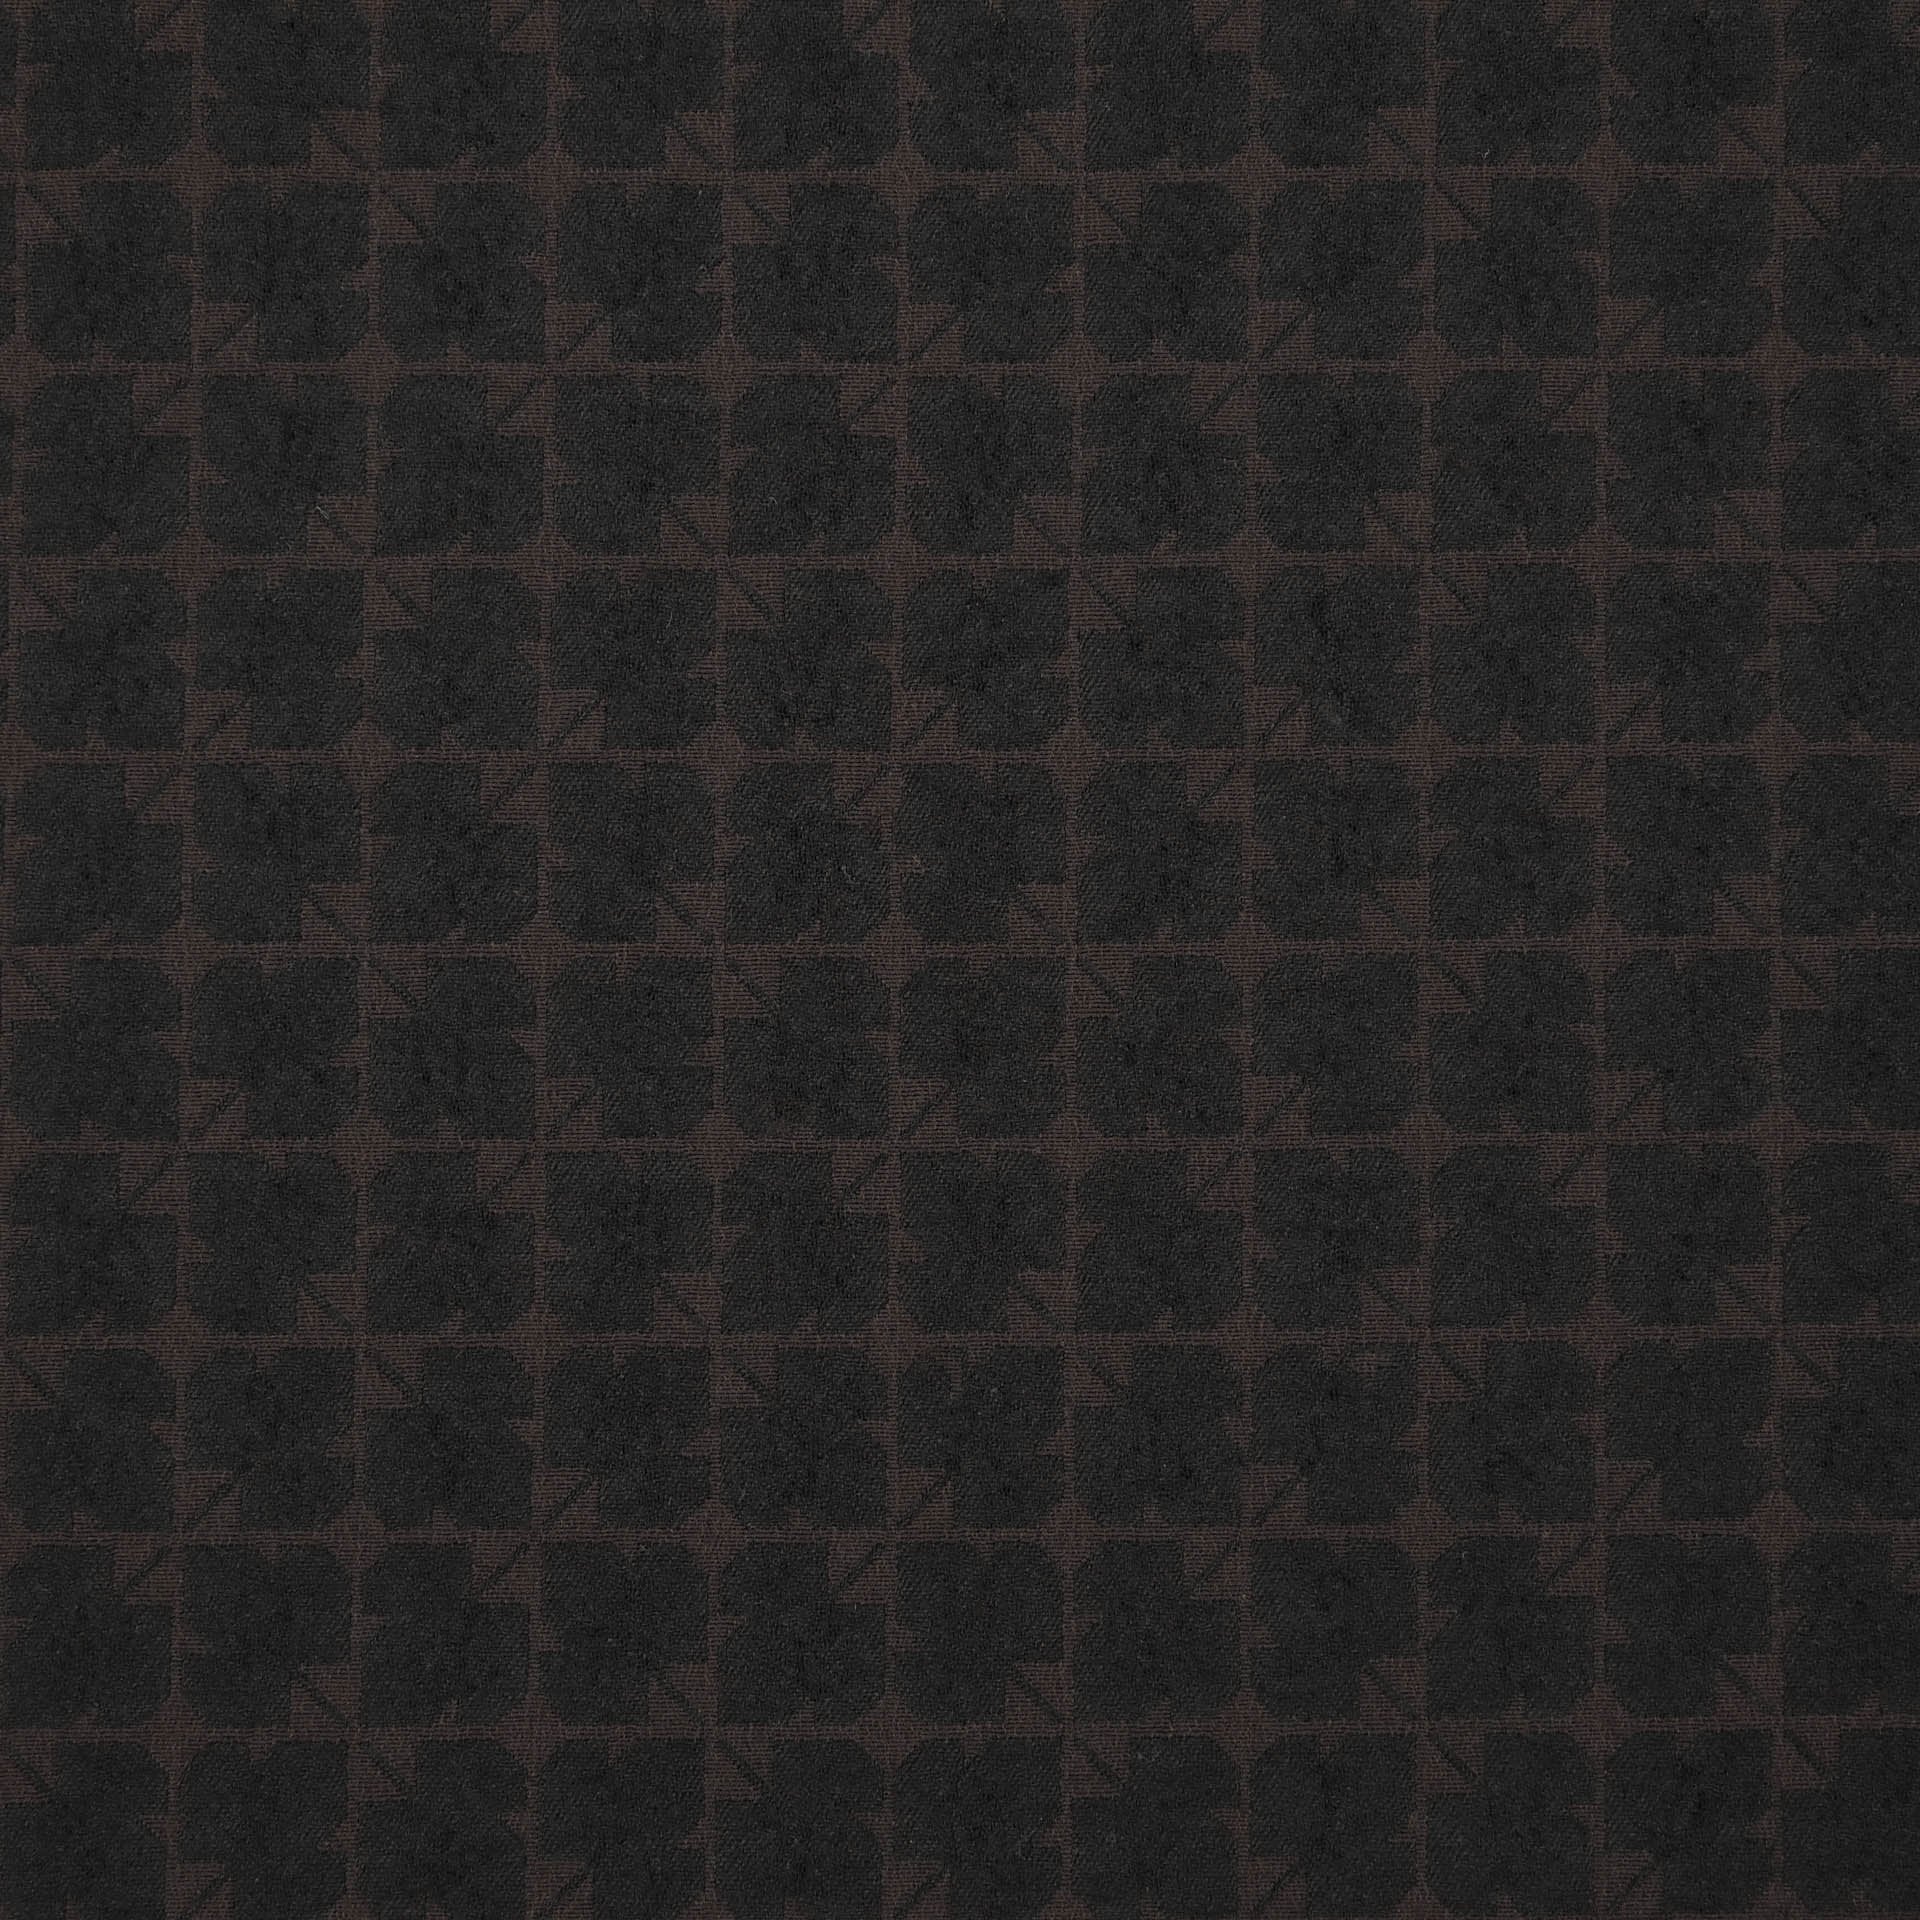 E817 Brown And Black Small Scale Check Jacquard Upholstery Fabric